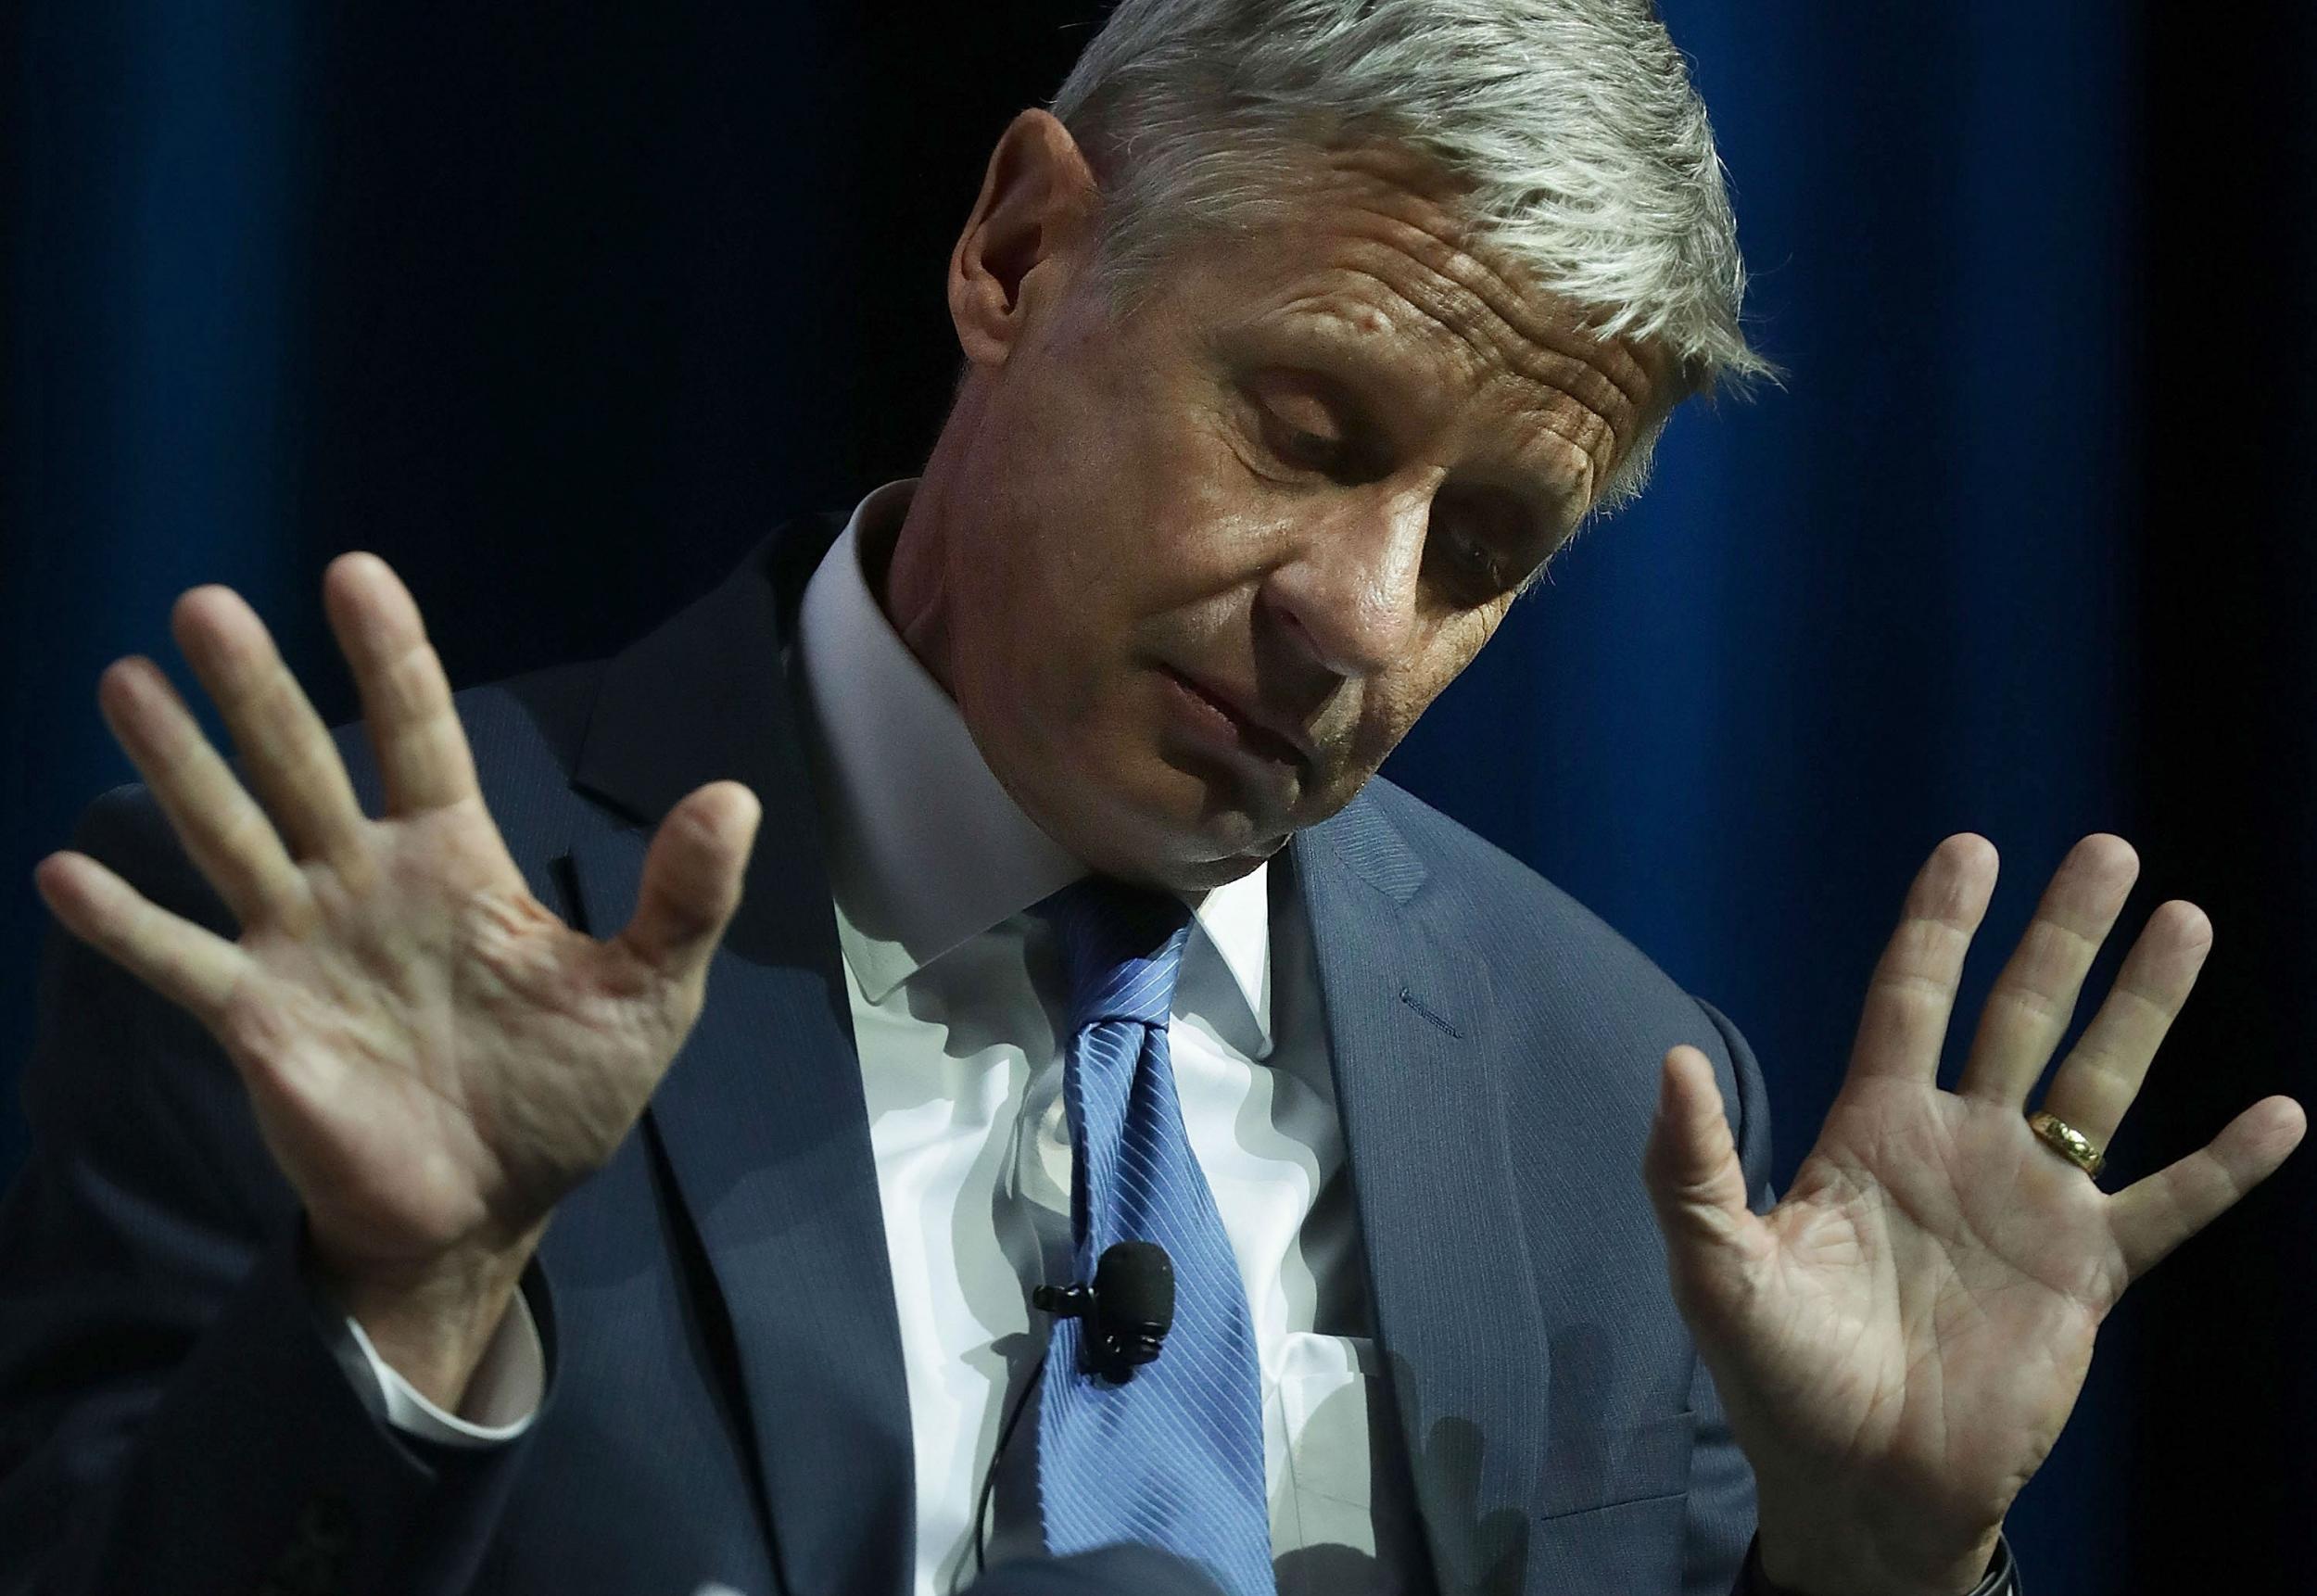 Gary Johnson is the Libertarian Party's presidential nominee